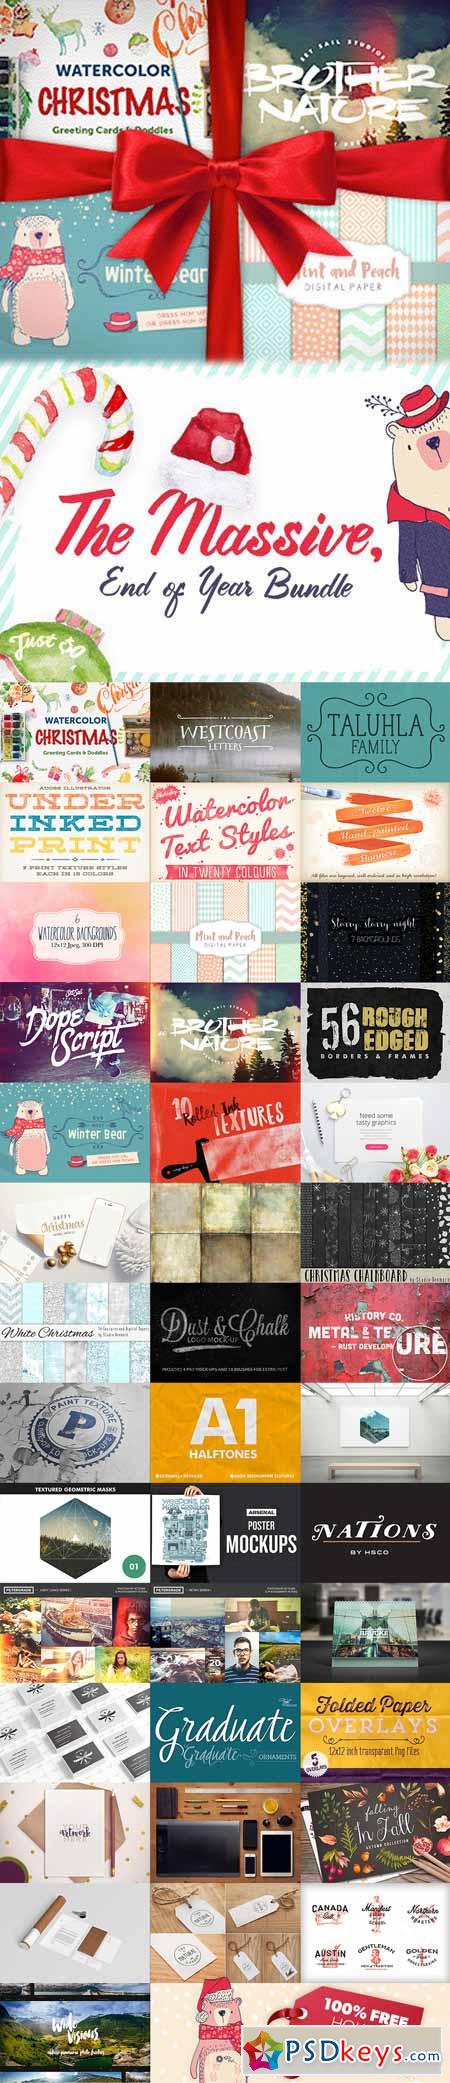 DESIGNCUTS - The Massive, End of Year Bundle